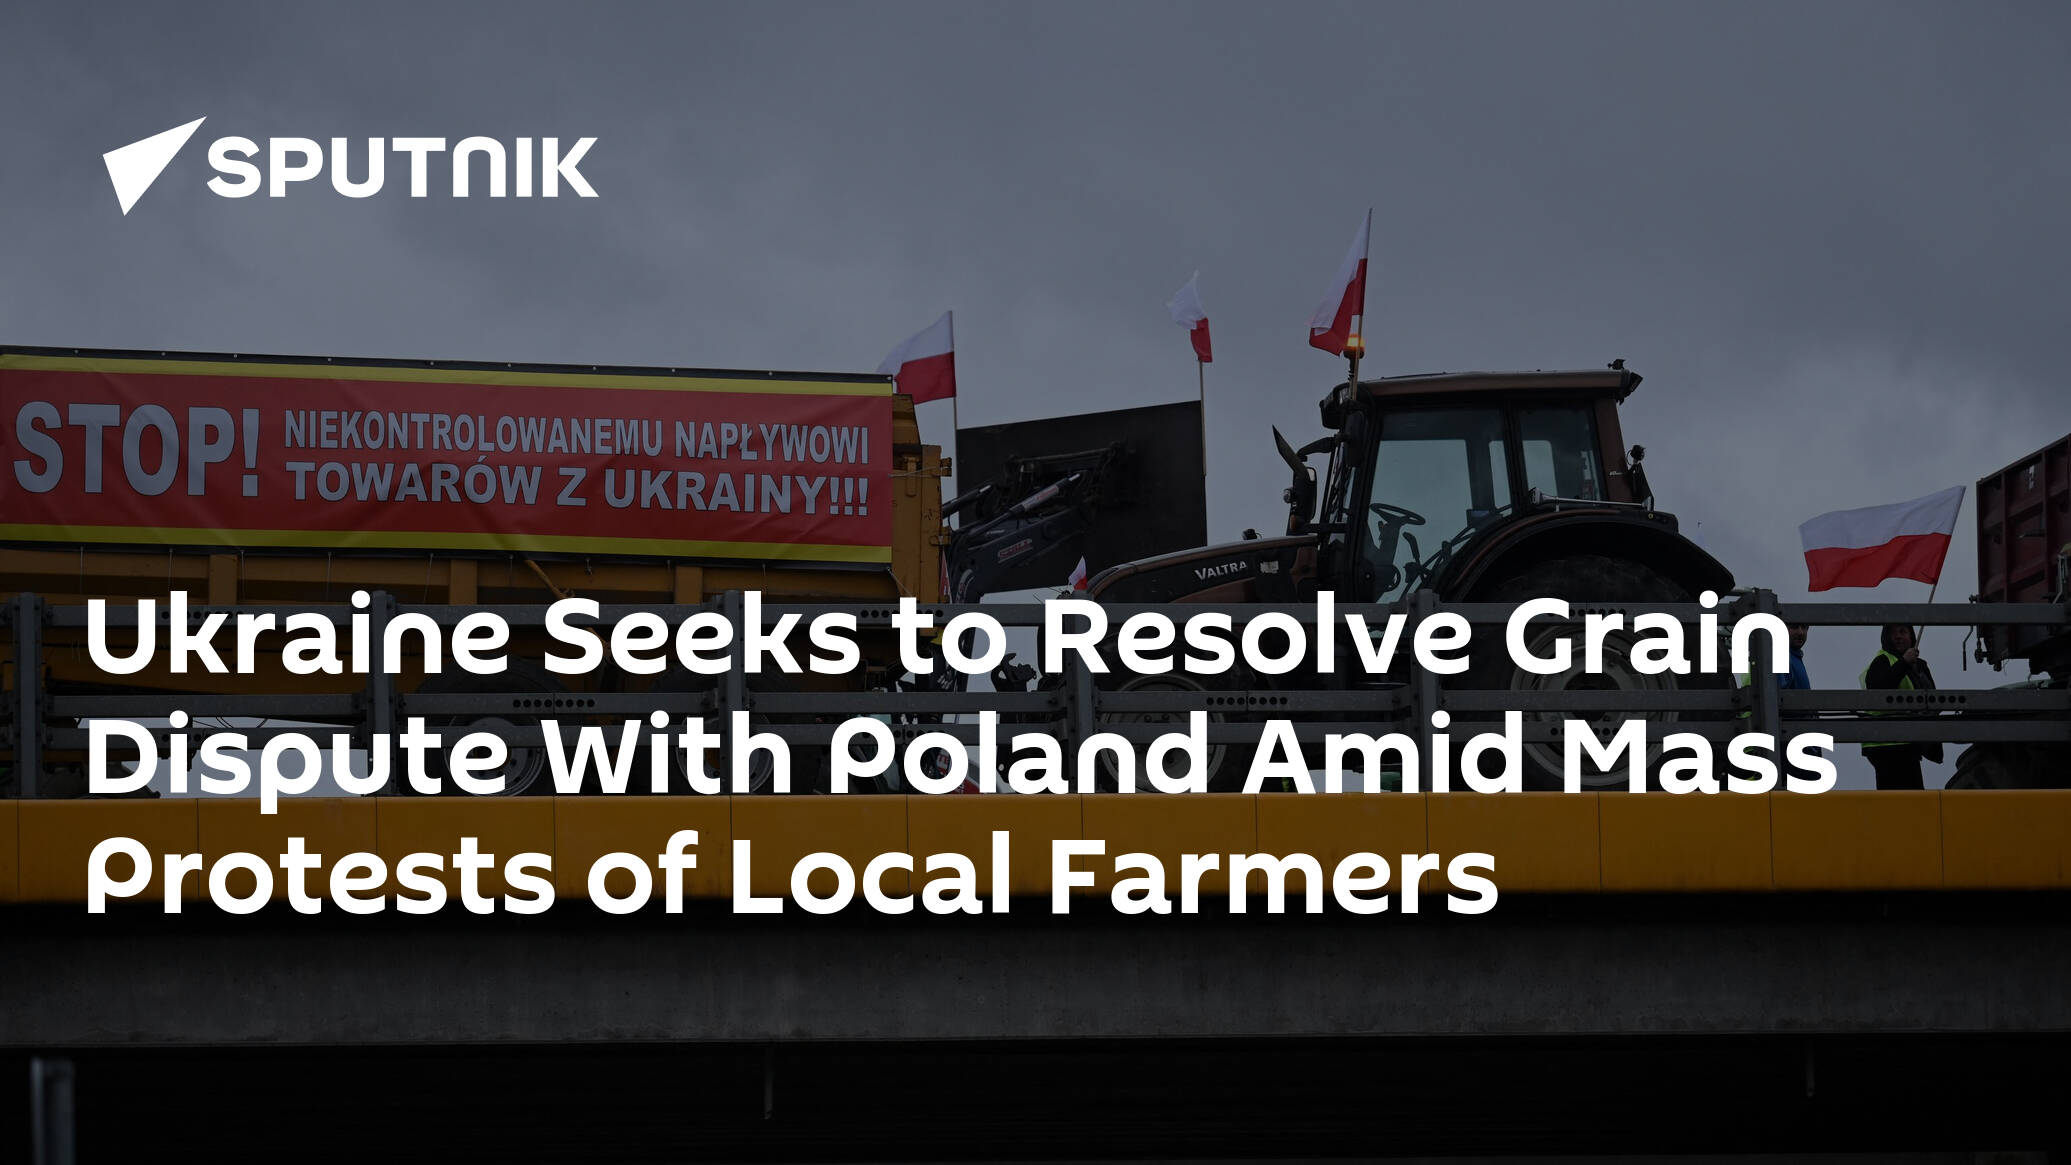 Ukraine Seeks to Resolve Grain Dispute With Poland Amid Mass Protests of Local Farmers